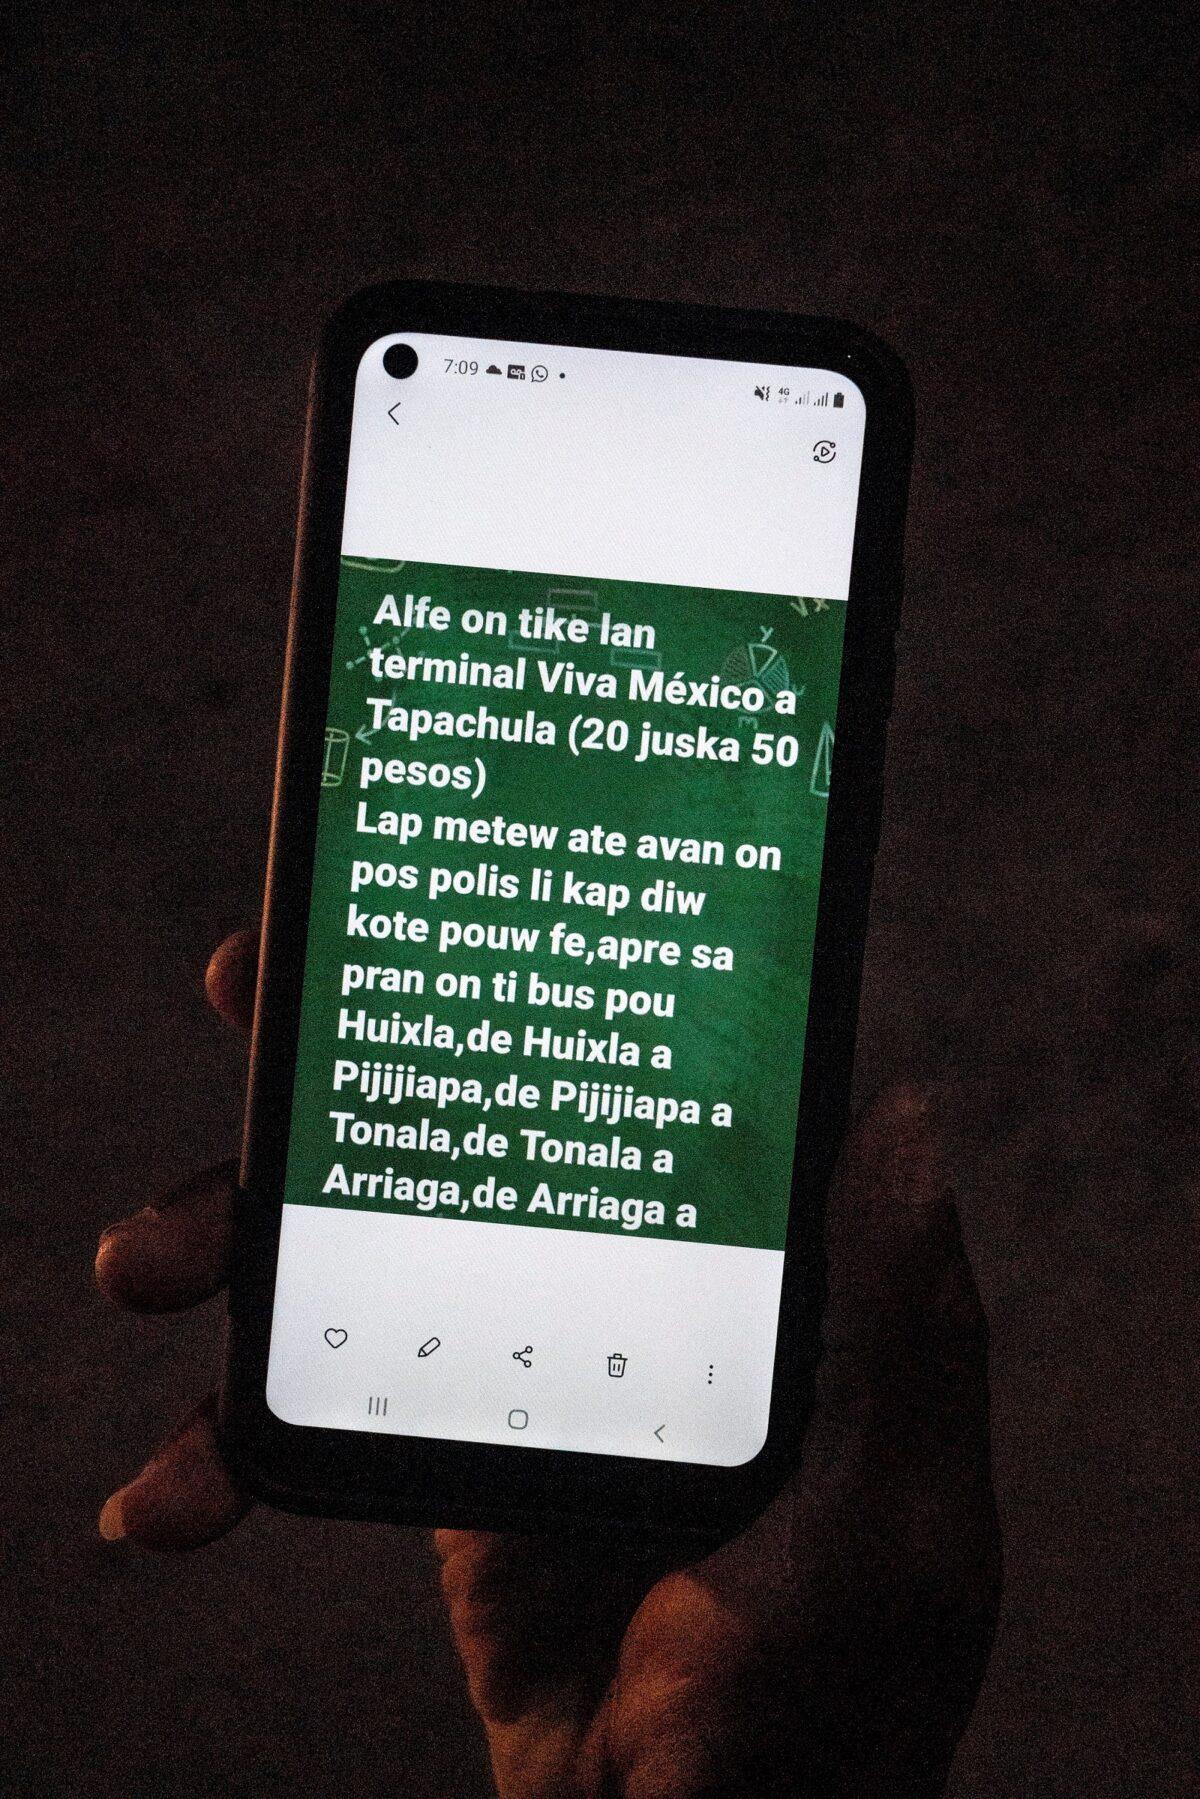 A migrant seeking asylum in the U.S. shows his smartphone with instructions on how to get to the U.S., in Ciudad Acuna, Mexico, on Sept. 17, 2021. (Go Nakamura/Reuters)